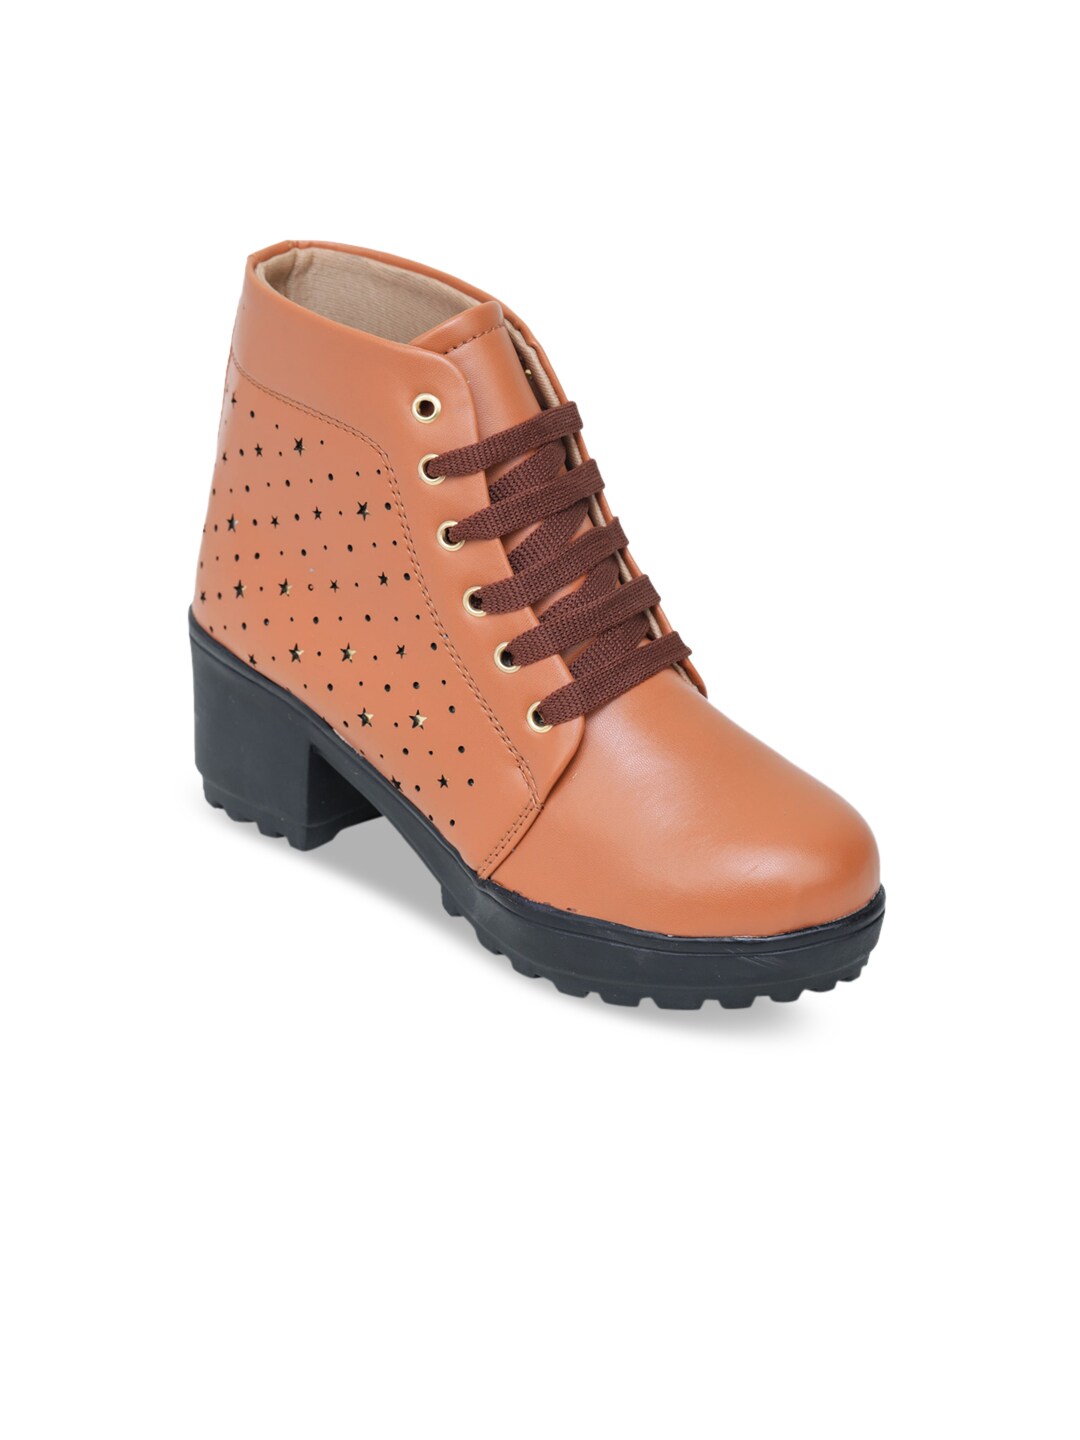 LONDON STEPS Tan Textured Block Heeled Boots with Laser Cuts Price in India